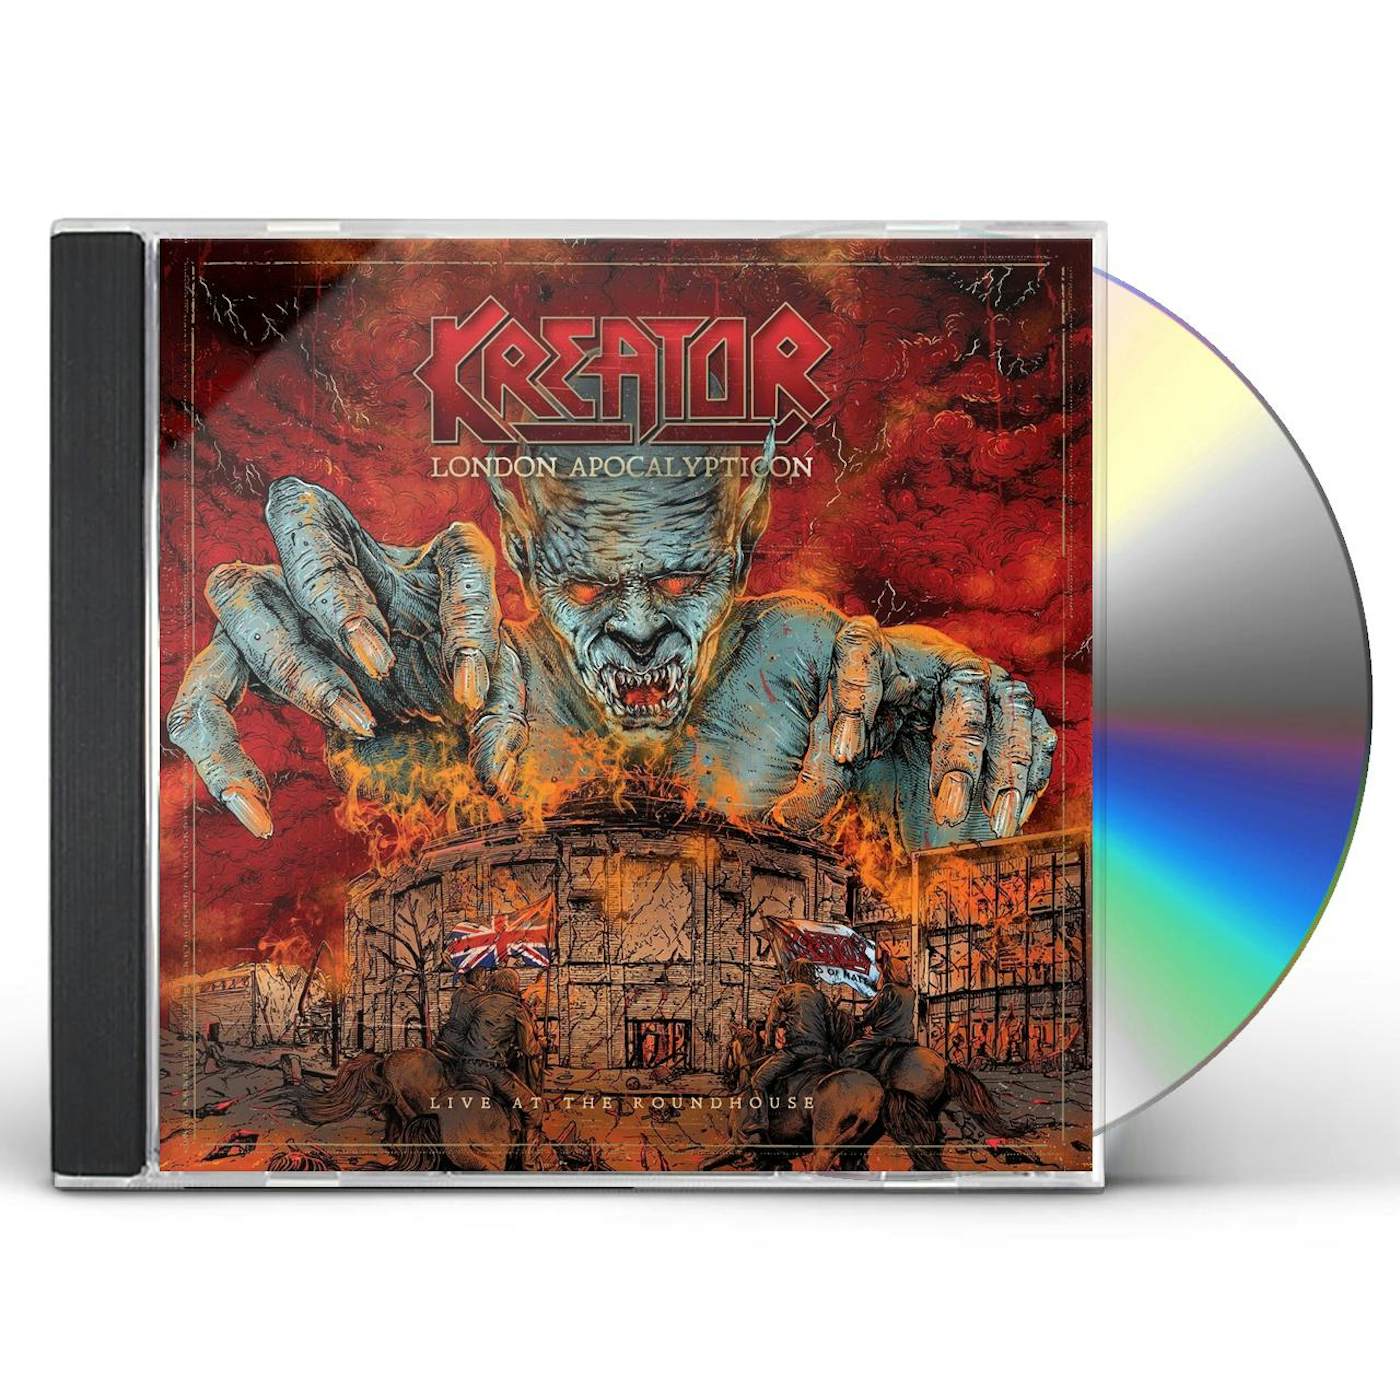 Kreator LONDON APOCALYPTICON - LIVE AT THE ROUNDHOUSE CD